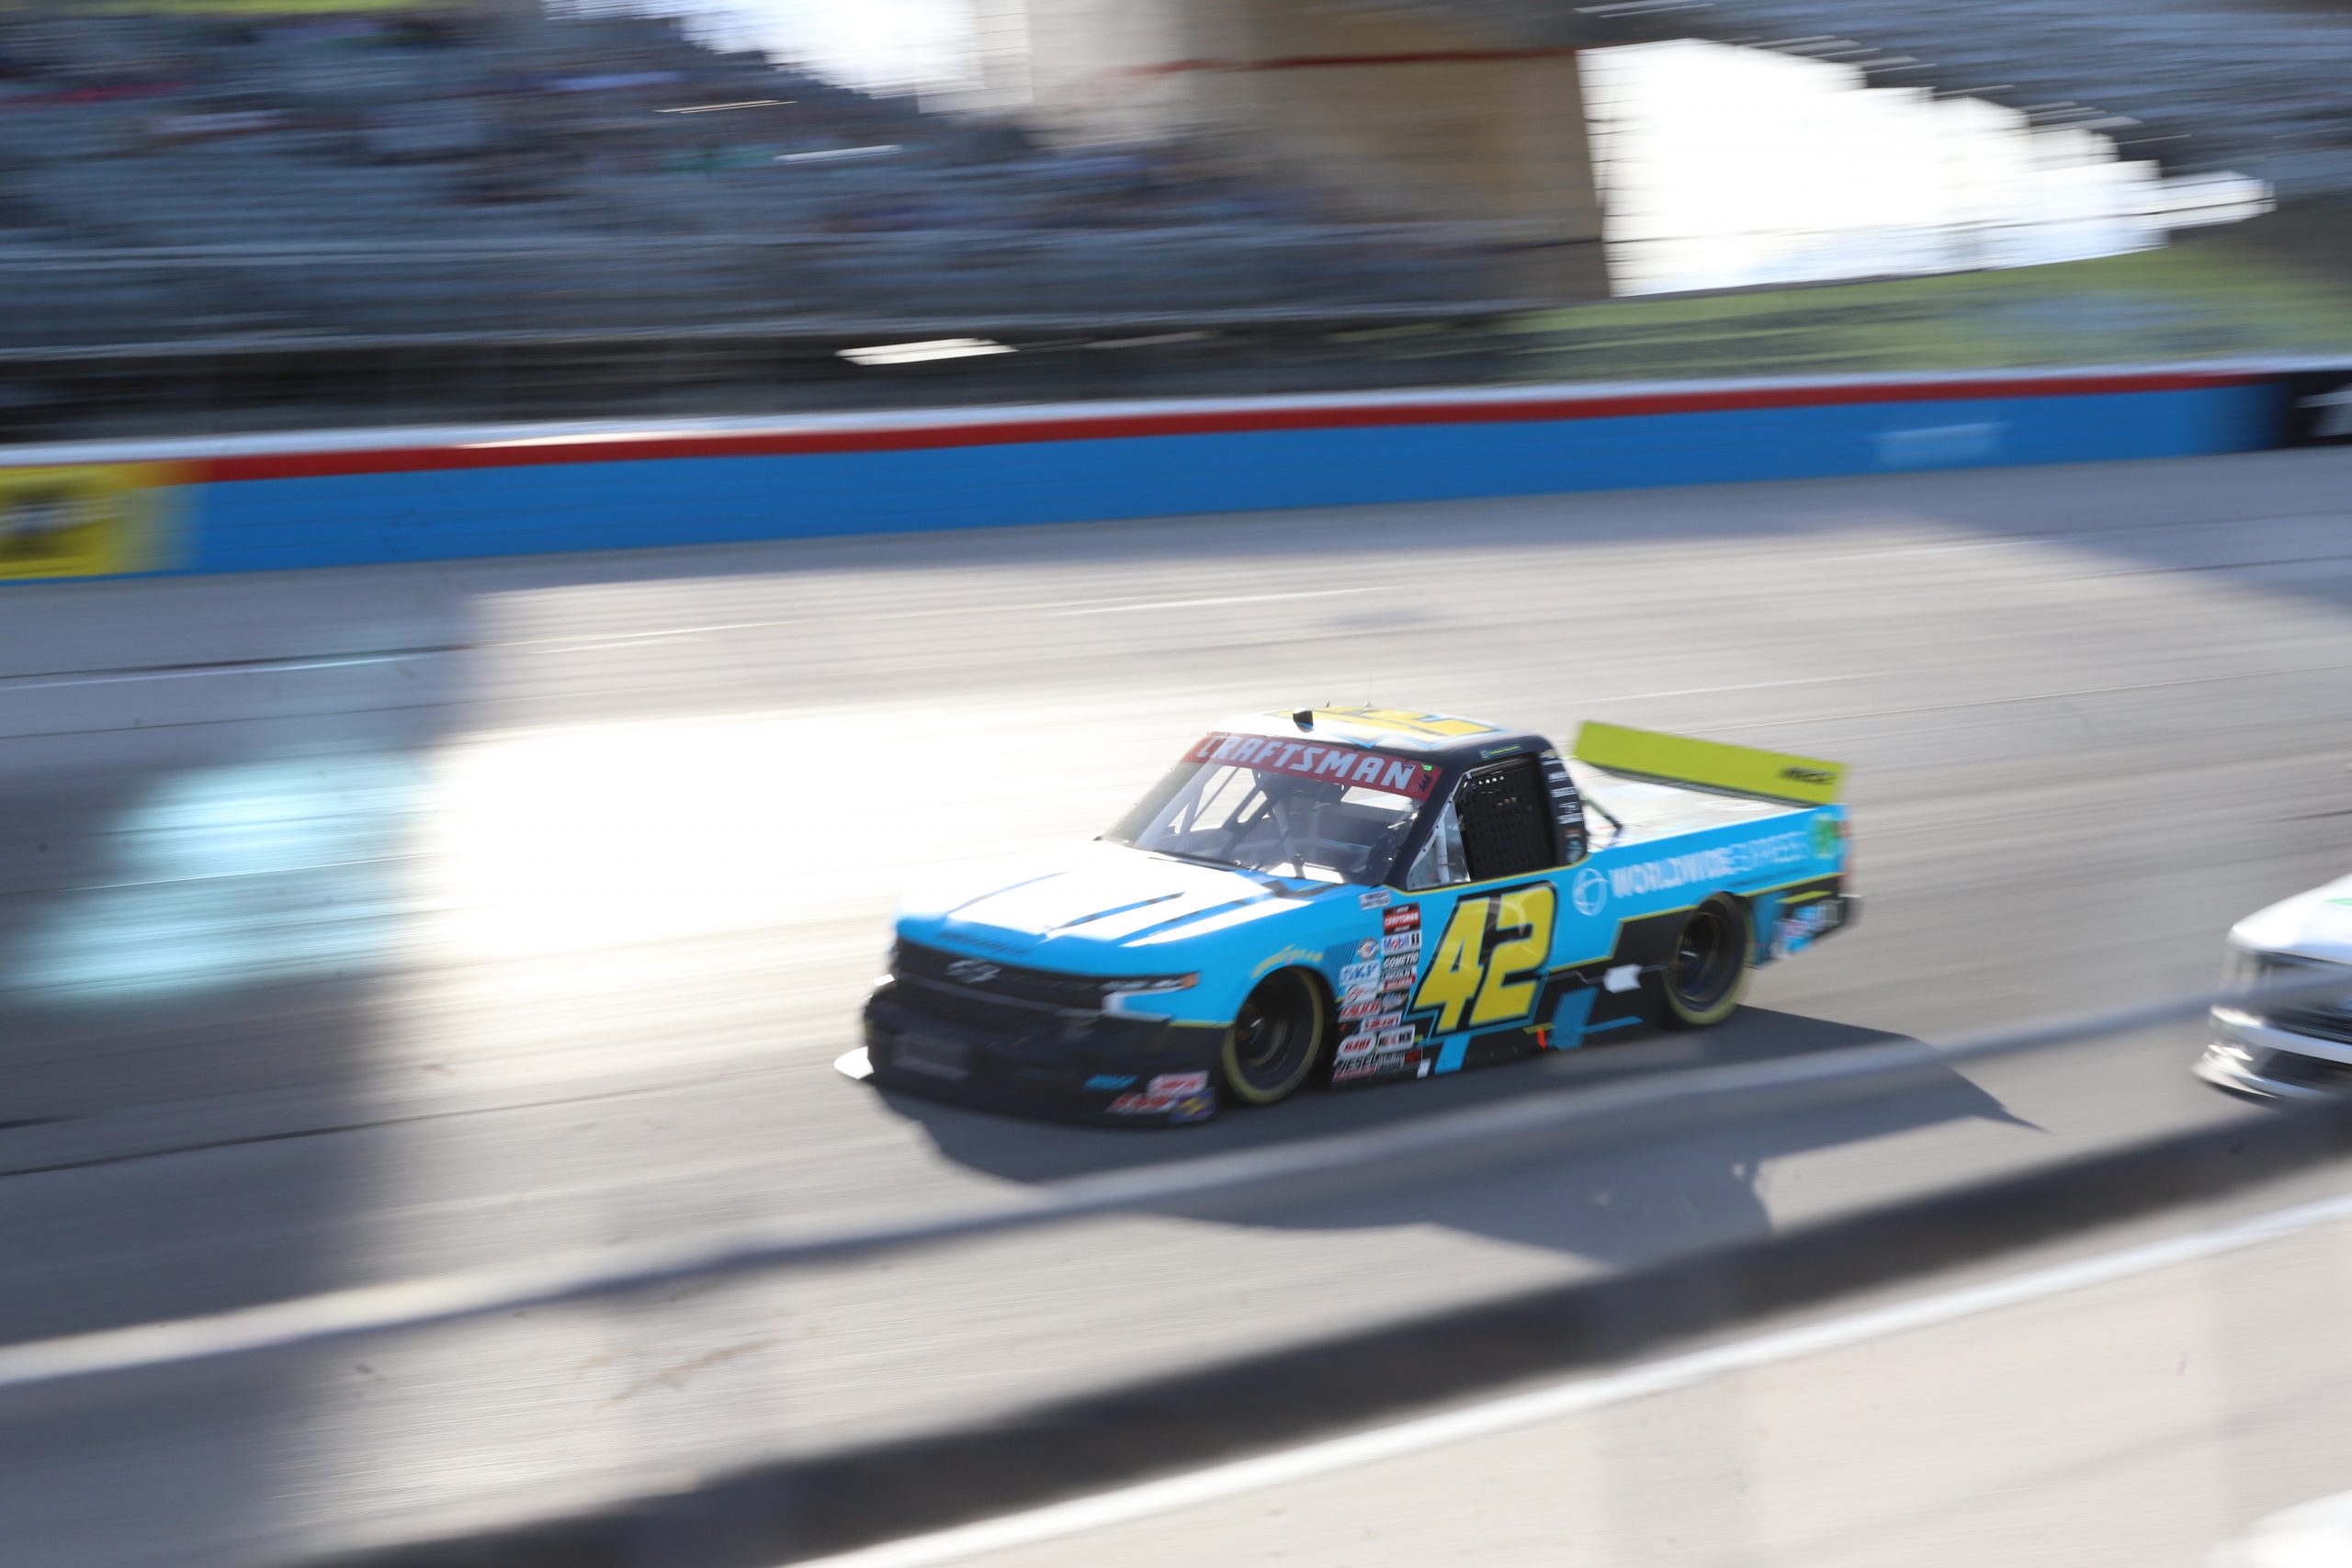 Hocevar can finally stop answering those inundation of questions about his first Truck race win. (Photo: Dylan Nadwodny | The Podium Finish)